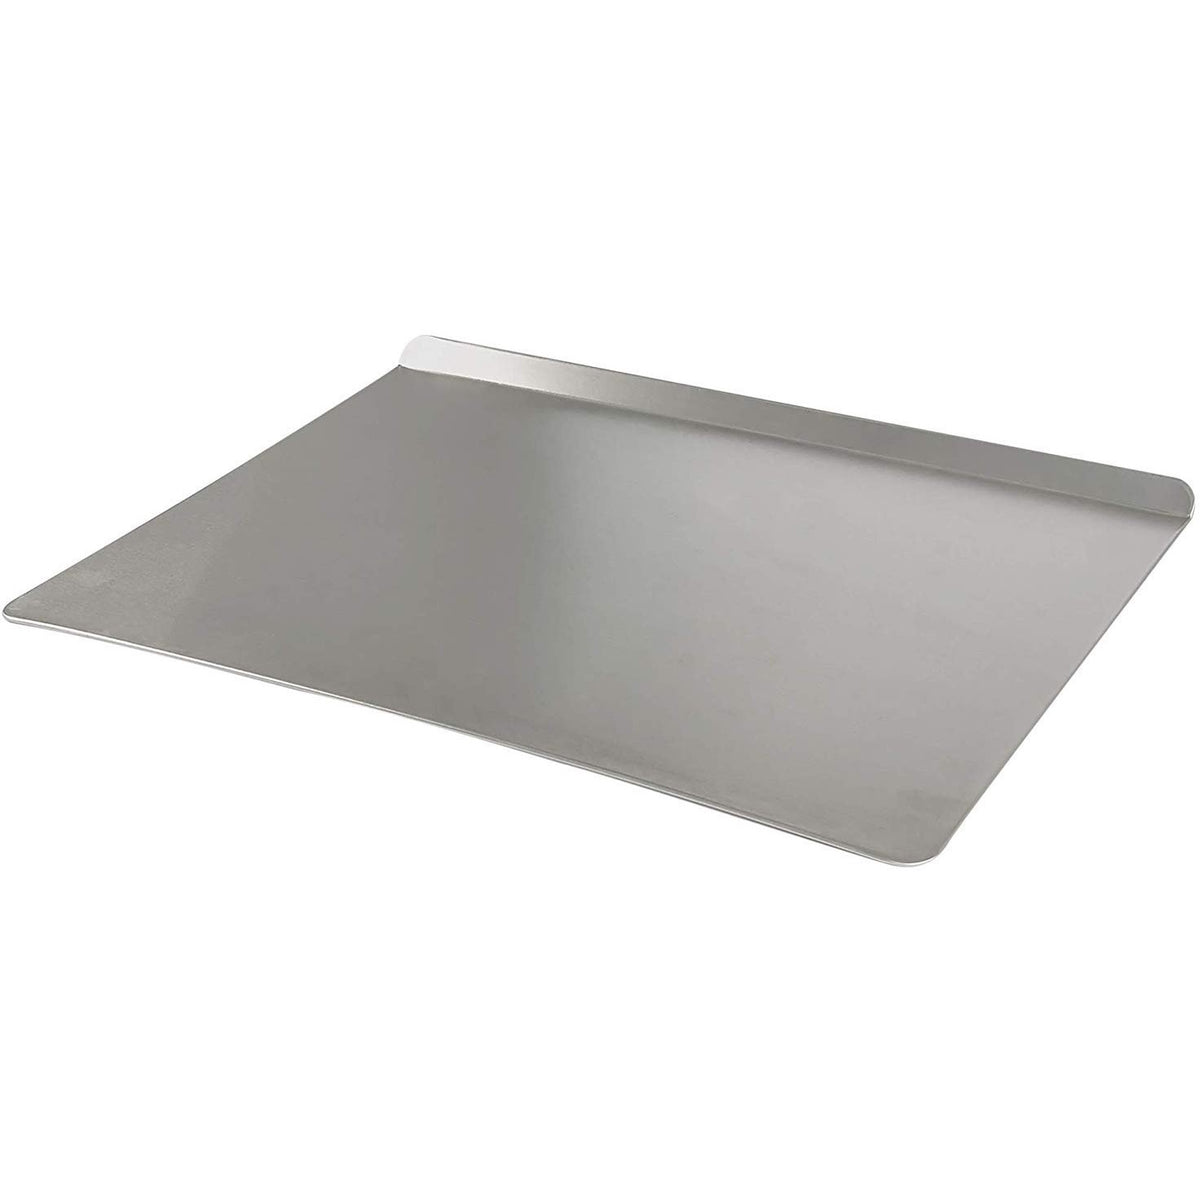  AirBake Natural Cookie Sheet, 20 x 15.5 in: Baking Sheets: Home  & Kitchen